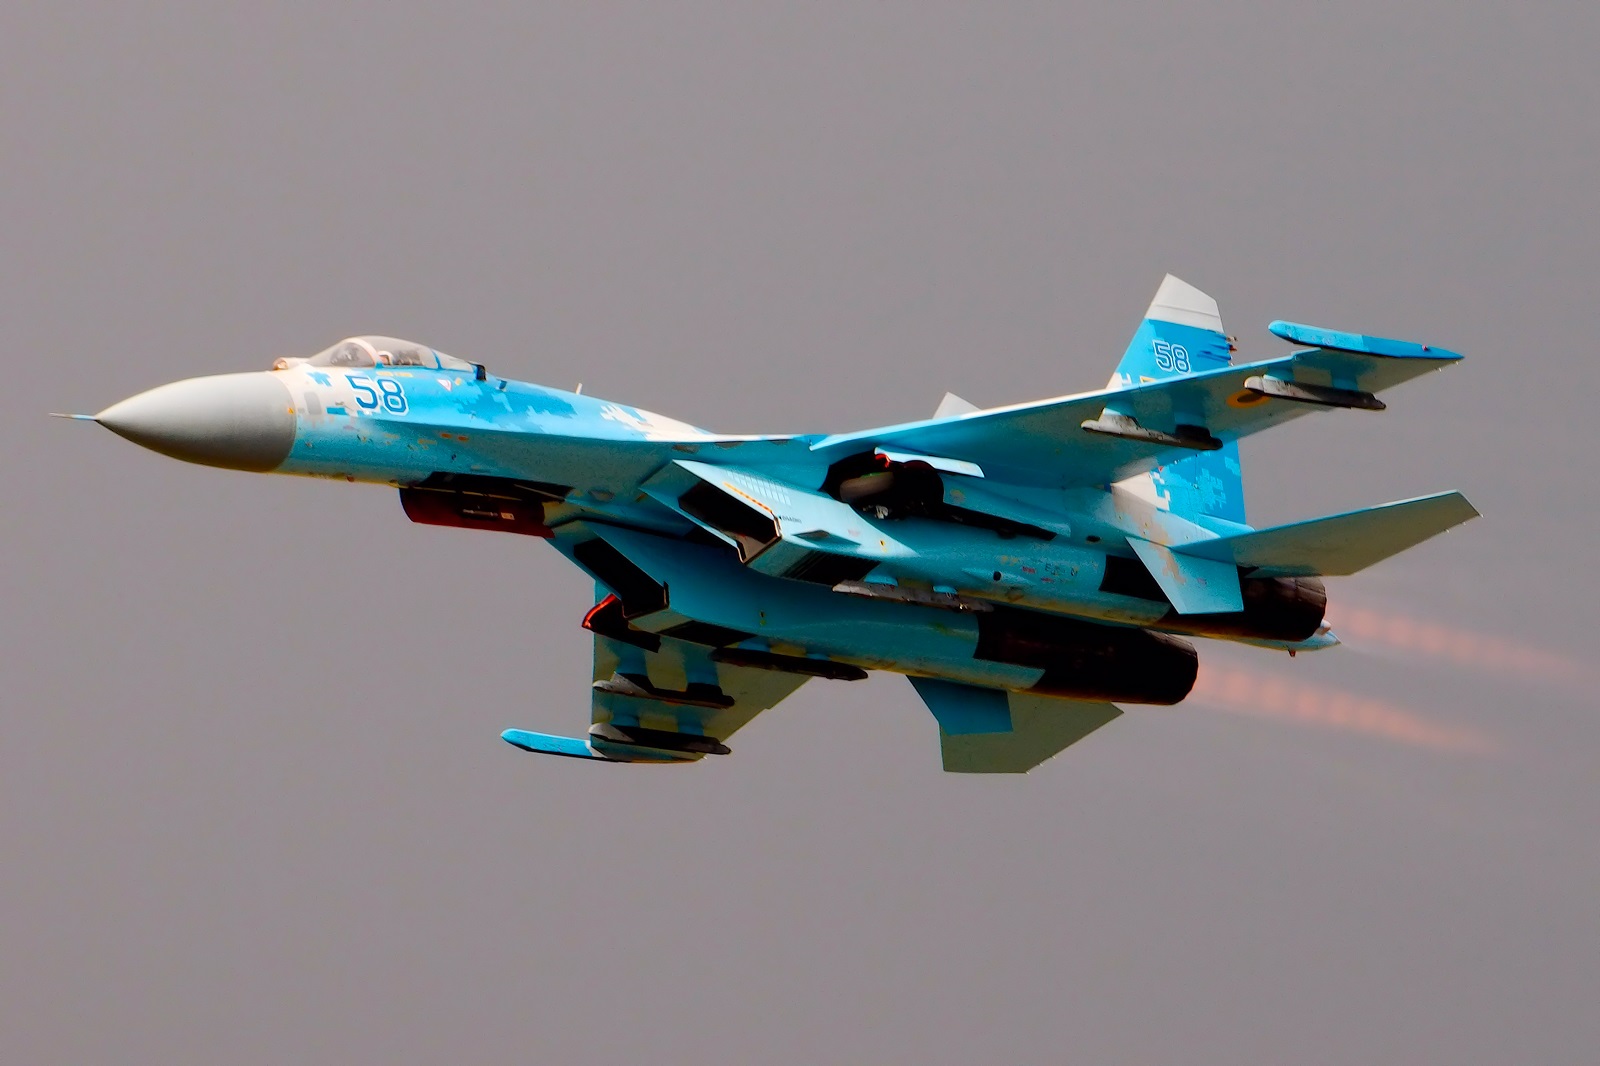 Russia S Very Own F 15 Eagle Meet The Deadly Su 27 Flanker The National Interest